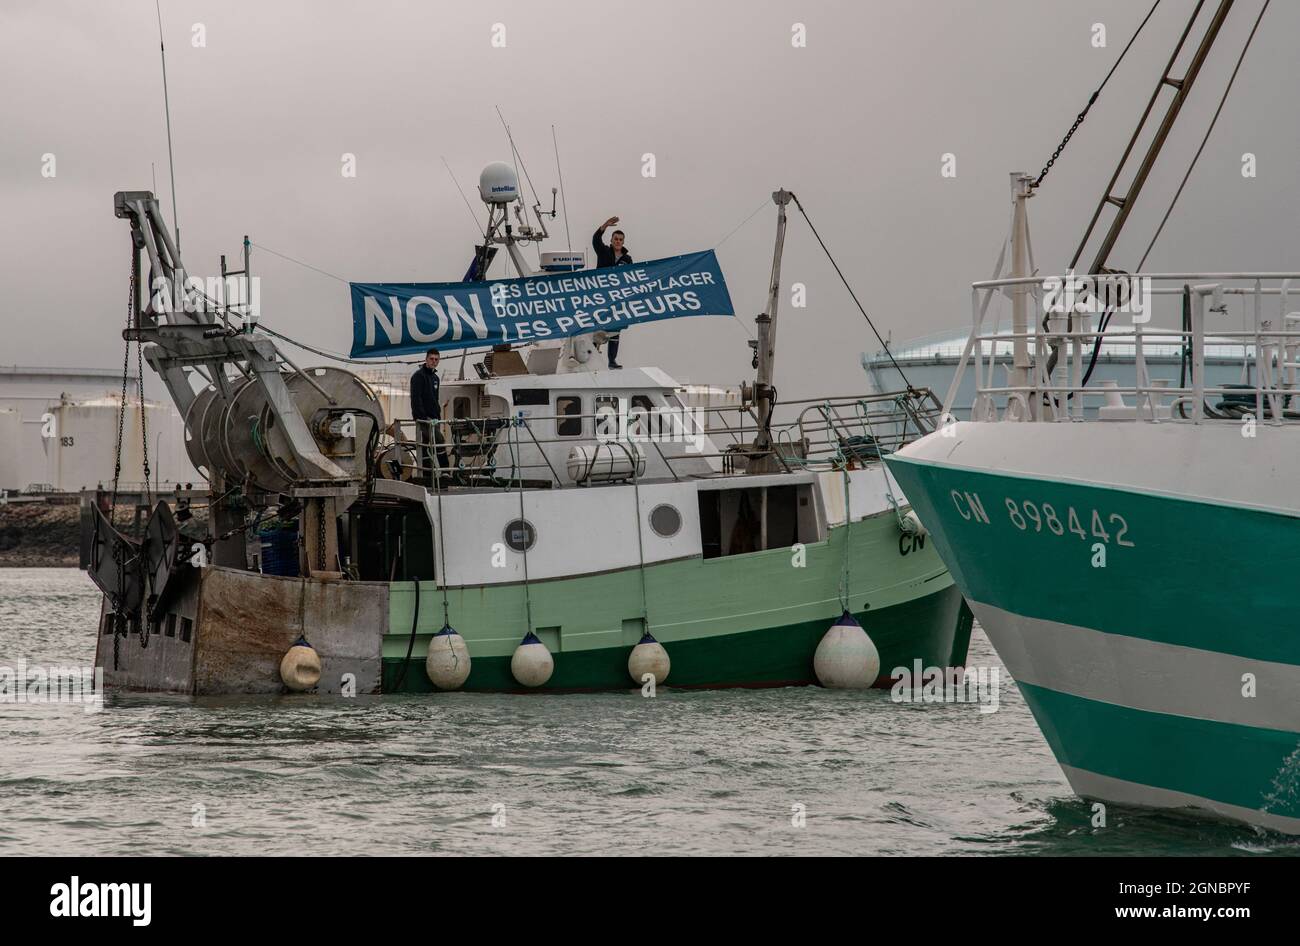 French fishing vessels demonstrated on the morning of September 24, 2021 in  the Port of Le Havre, Normandy, France, against offshore wind plan with the  slogan “No to wind turbines that destroy